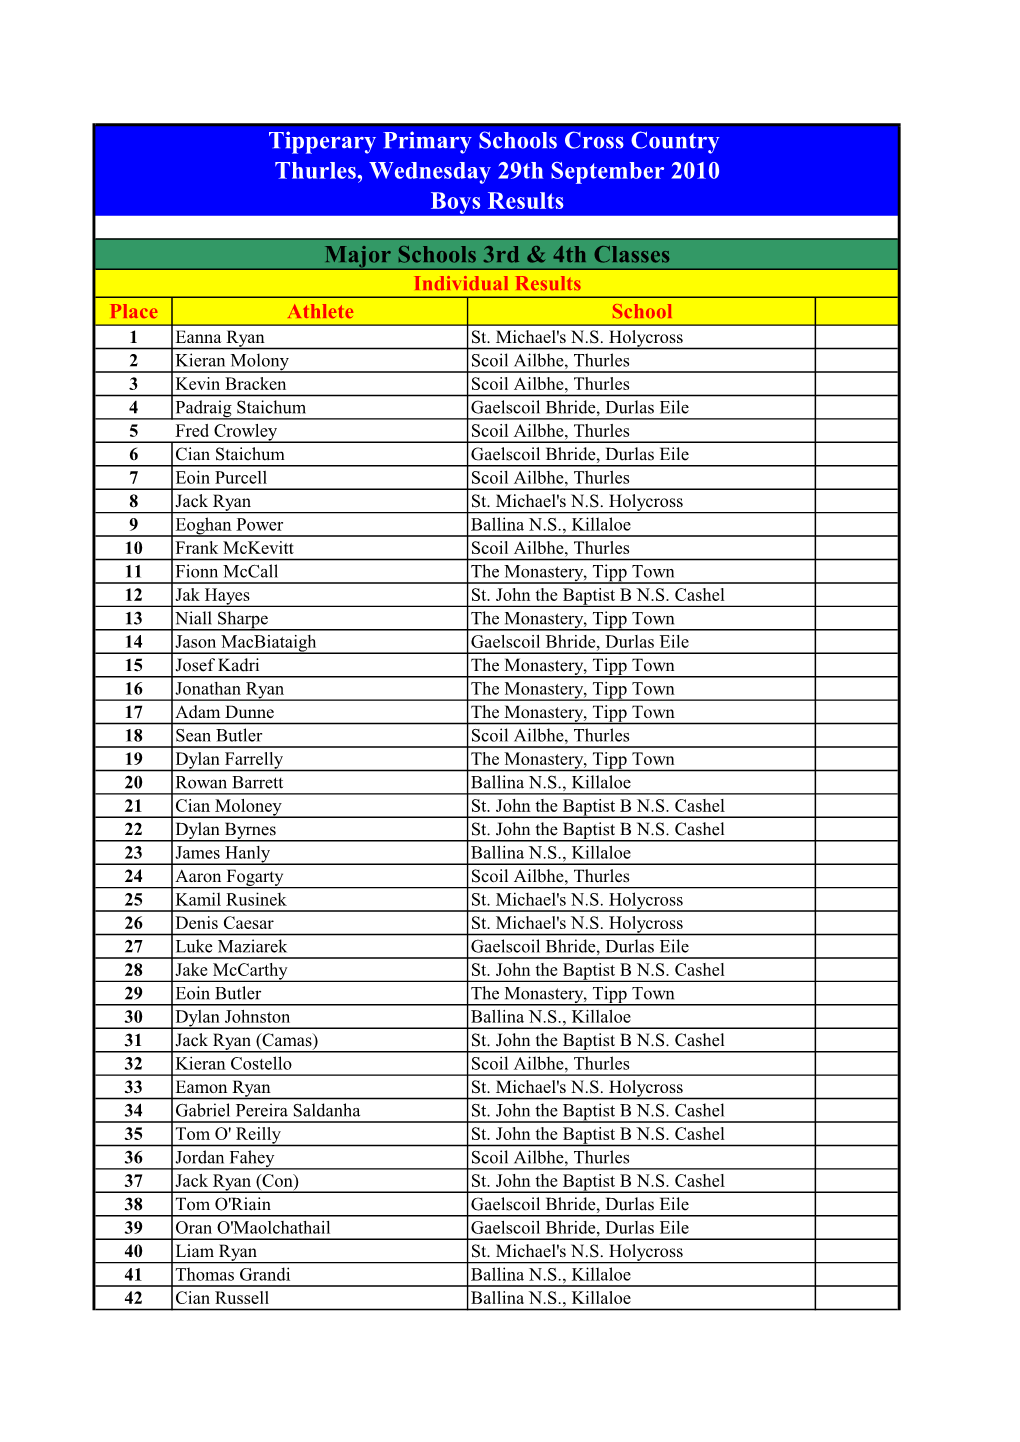 Tipperary Primary Schools Cross Country Thurles, Wednesday 29Th September 2010 Boys Results Major Schools 3Rd & 4Th Classes